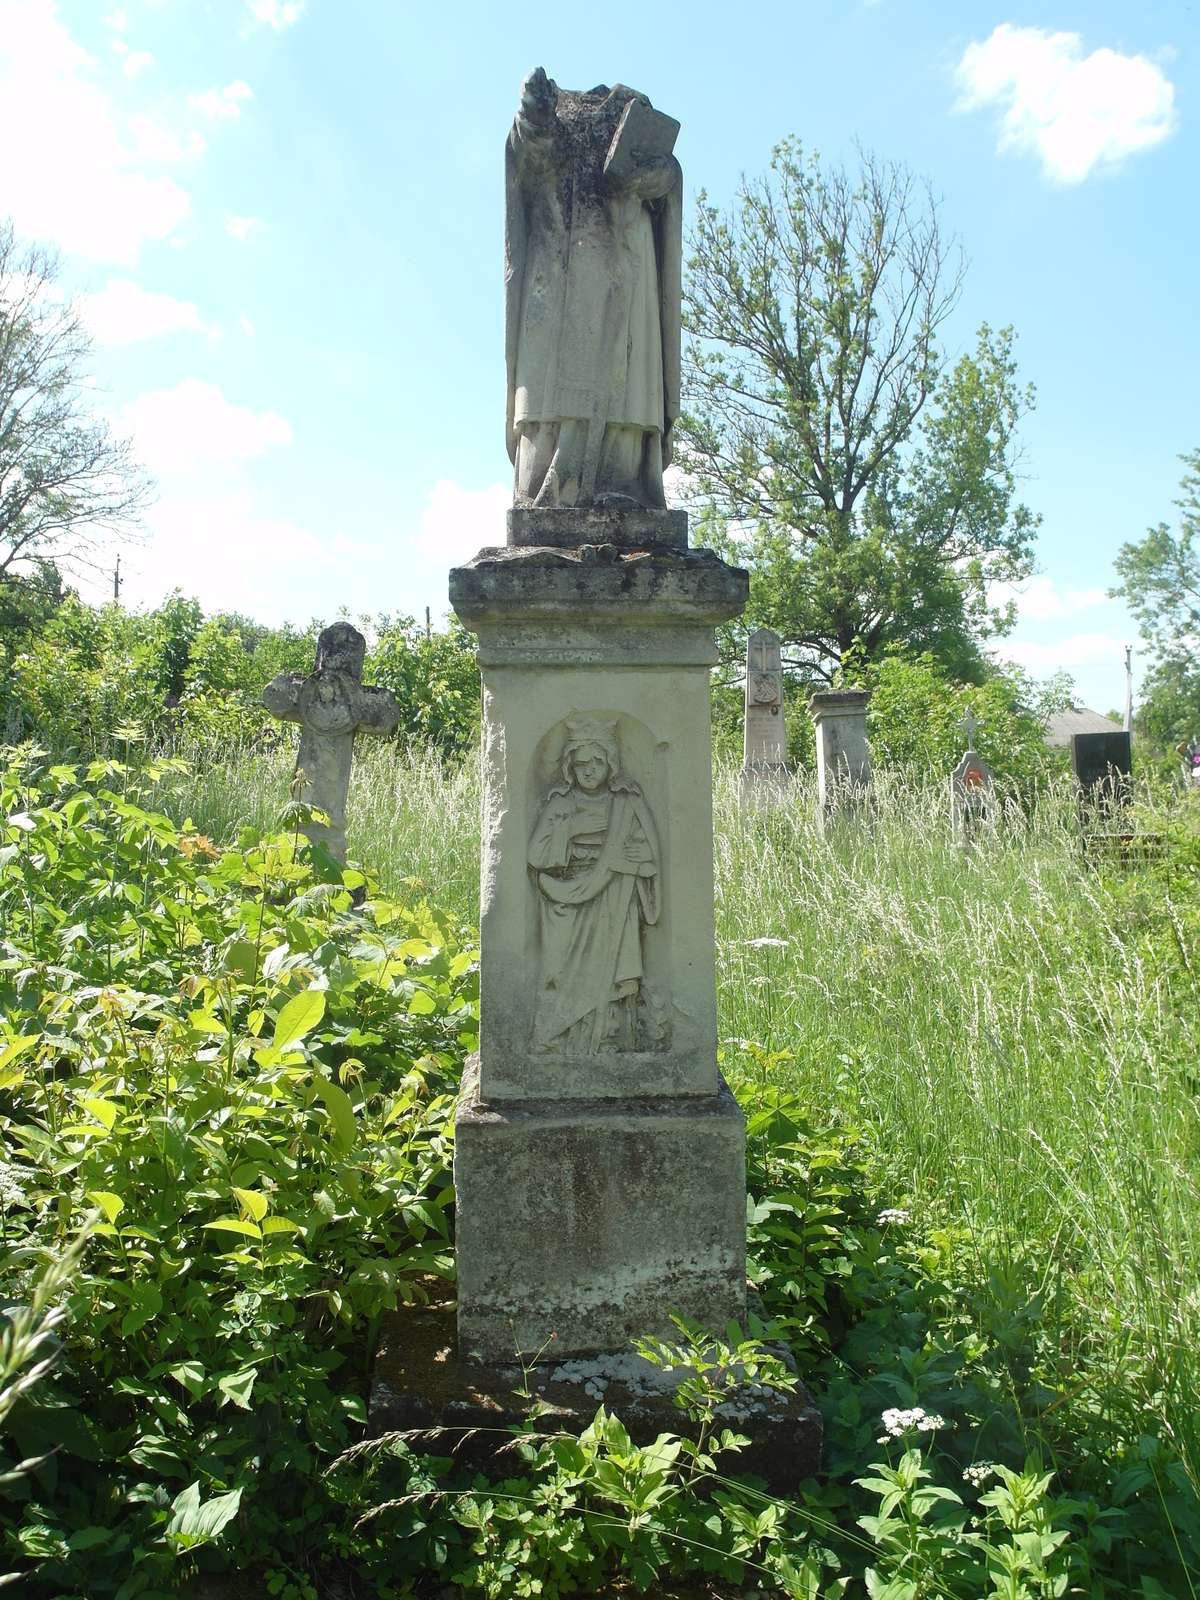 Tombstone of Catherine and Nicholas Stocki, Zbarazh cemetery, as of 2018.